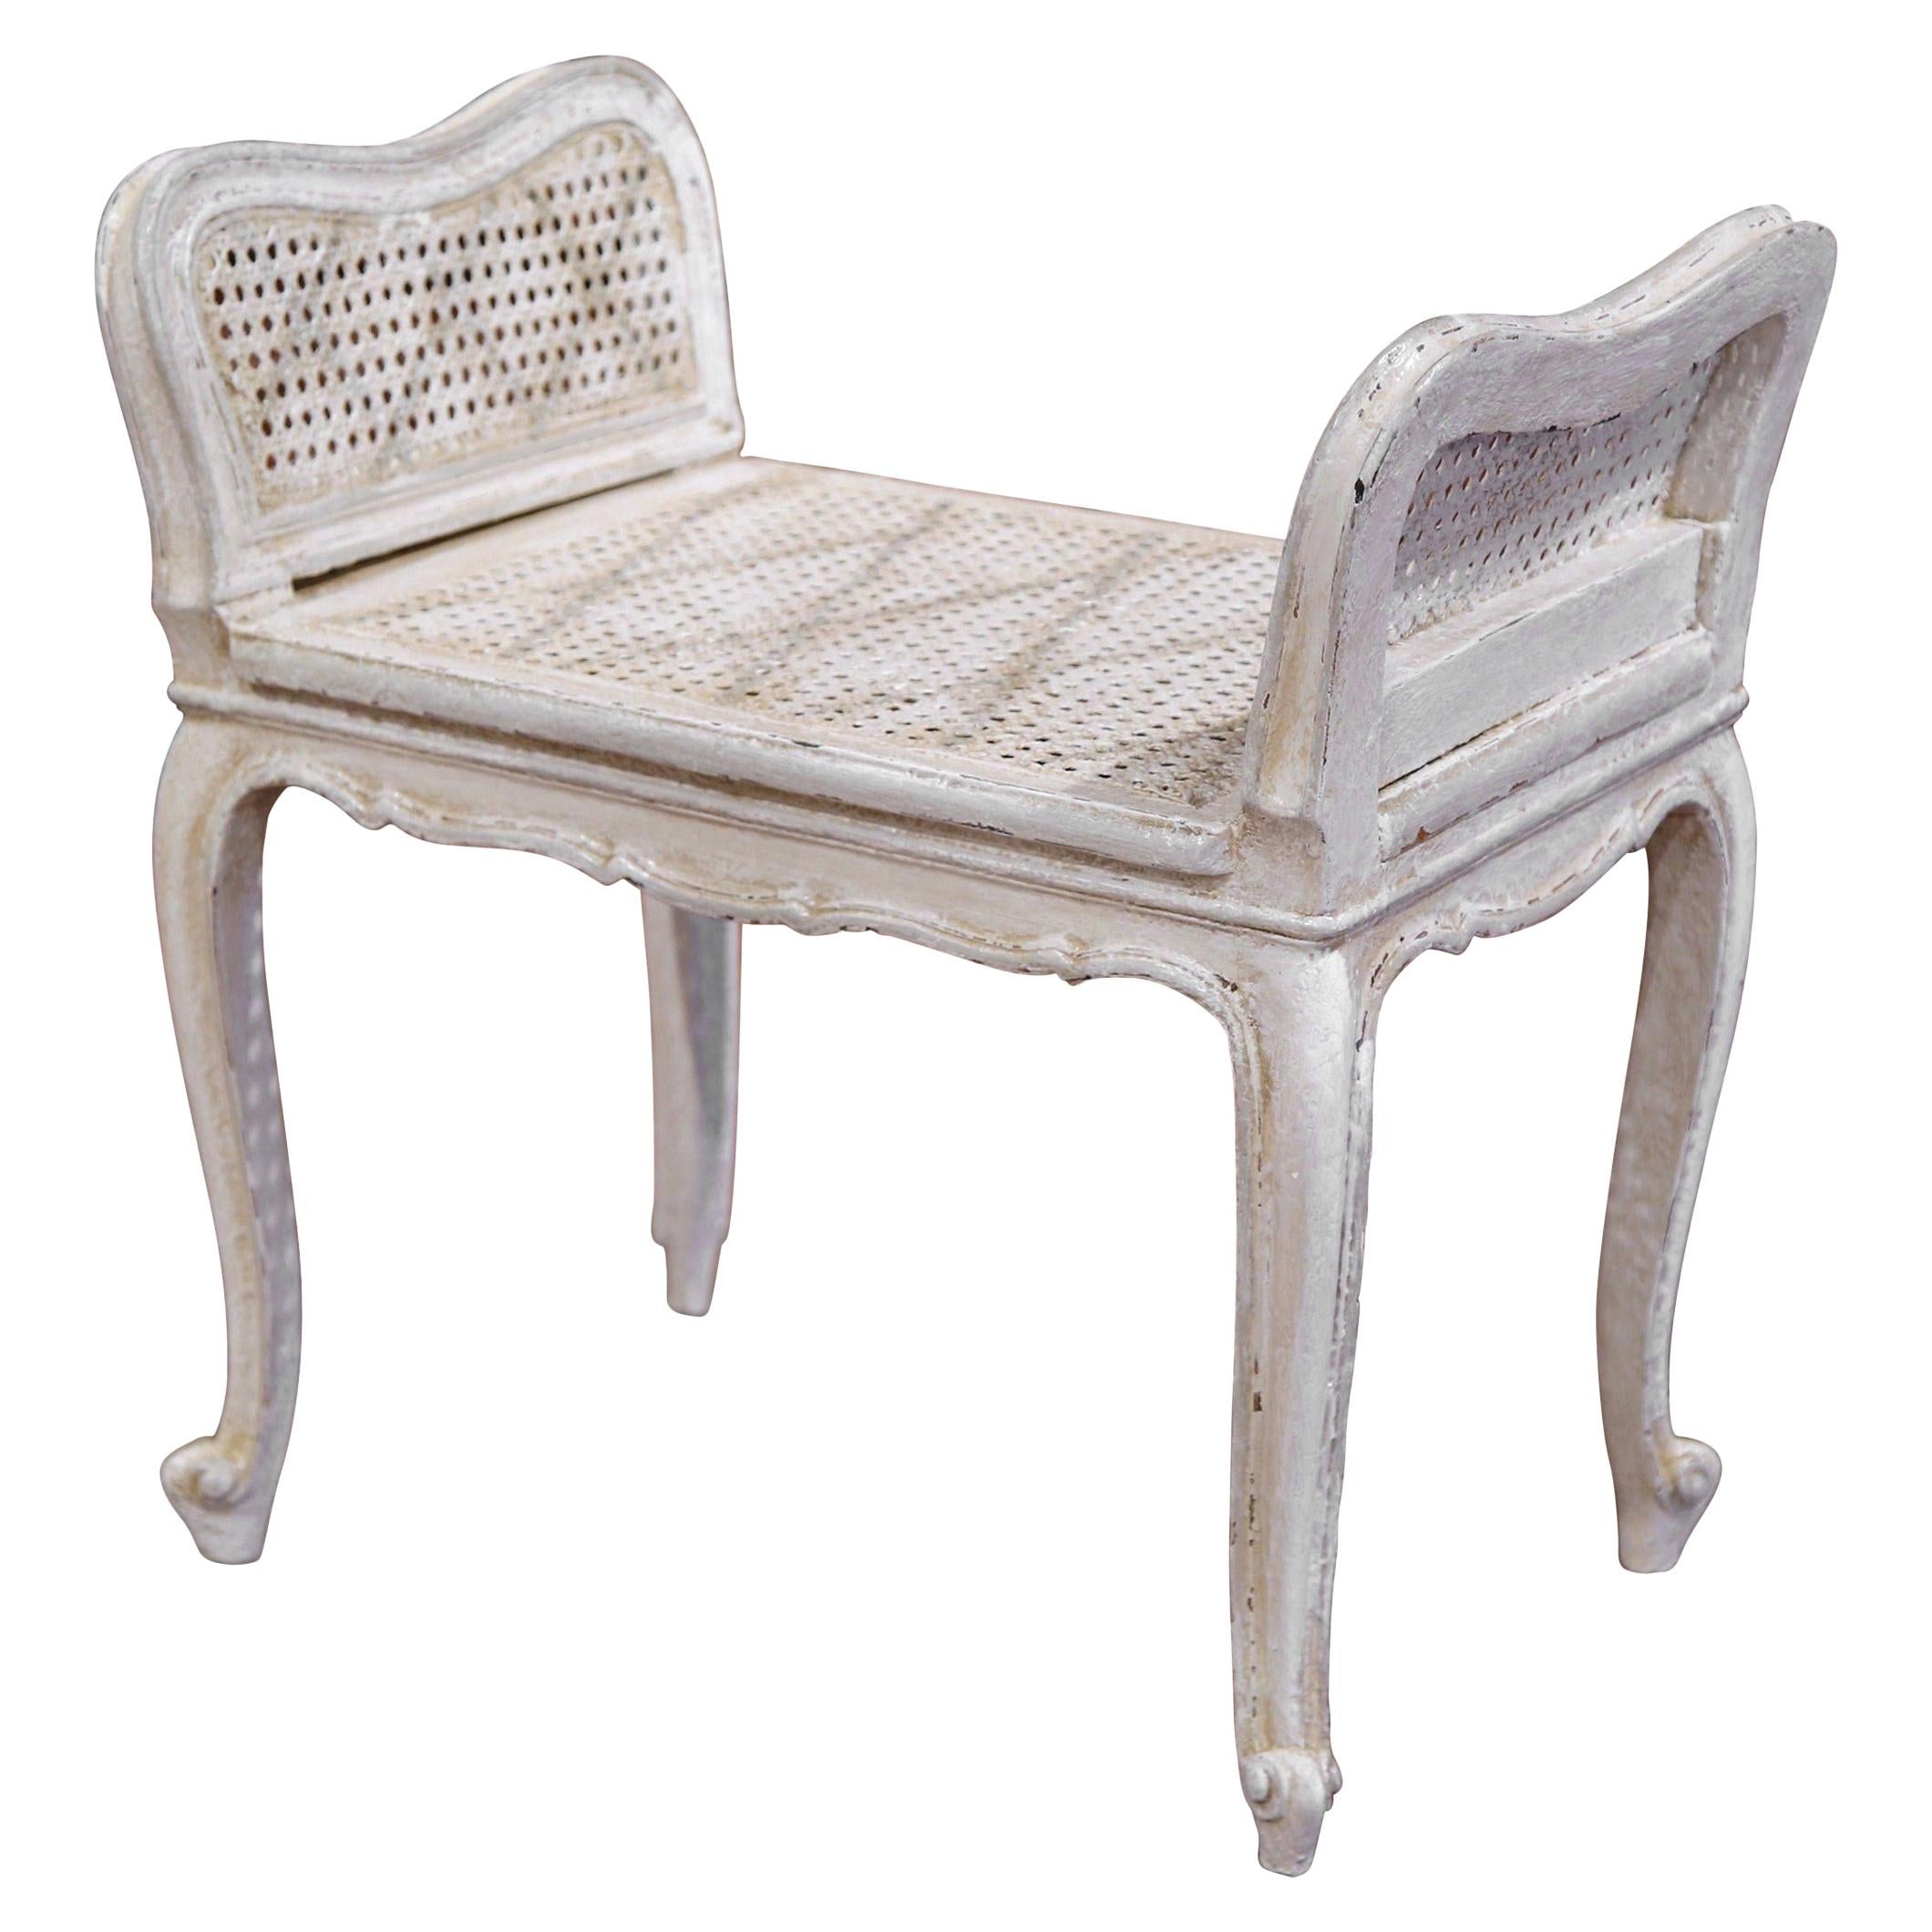 Early 20th Century French Louis XV Carved Painted Bench with Cane Seating